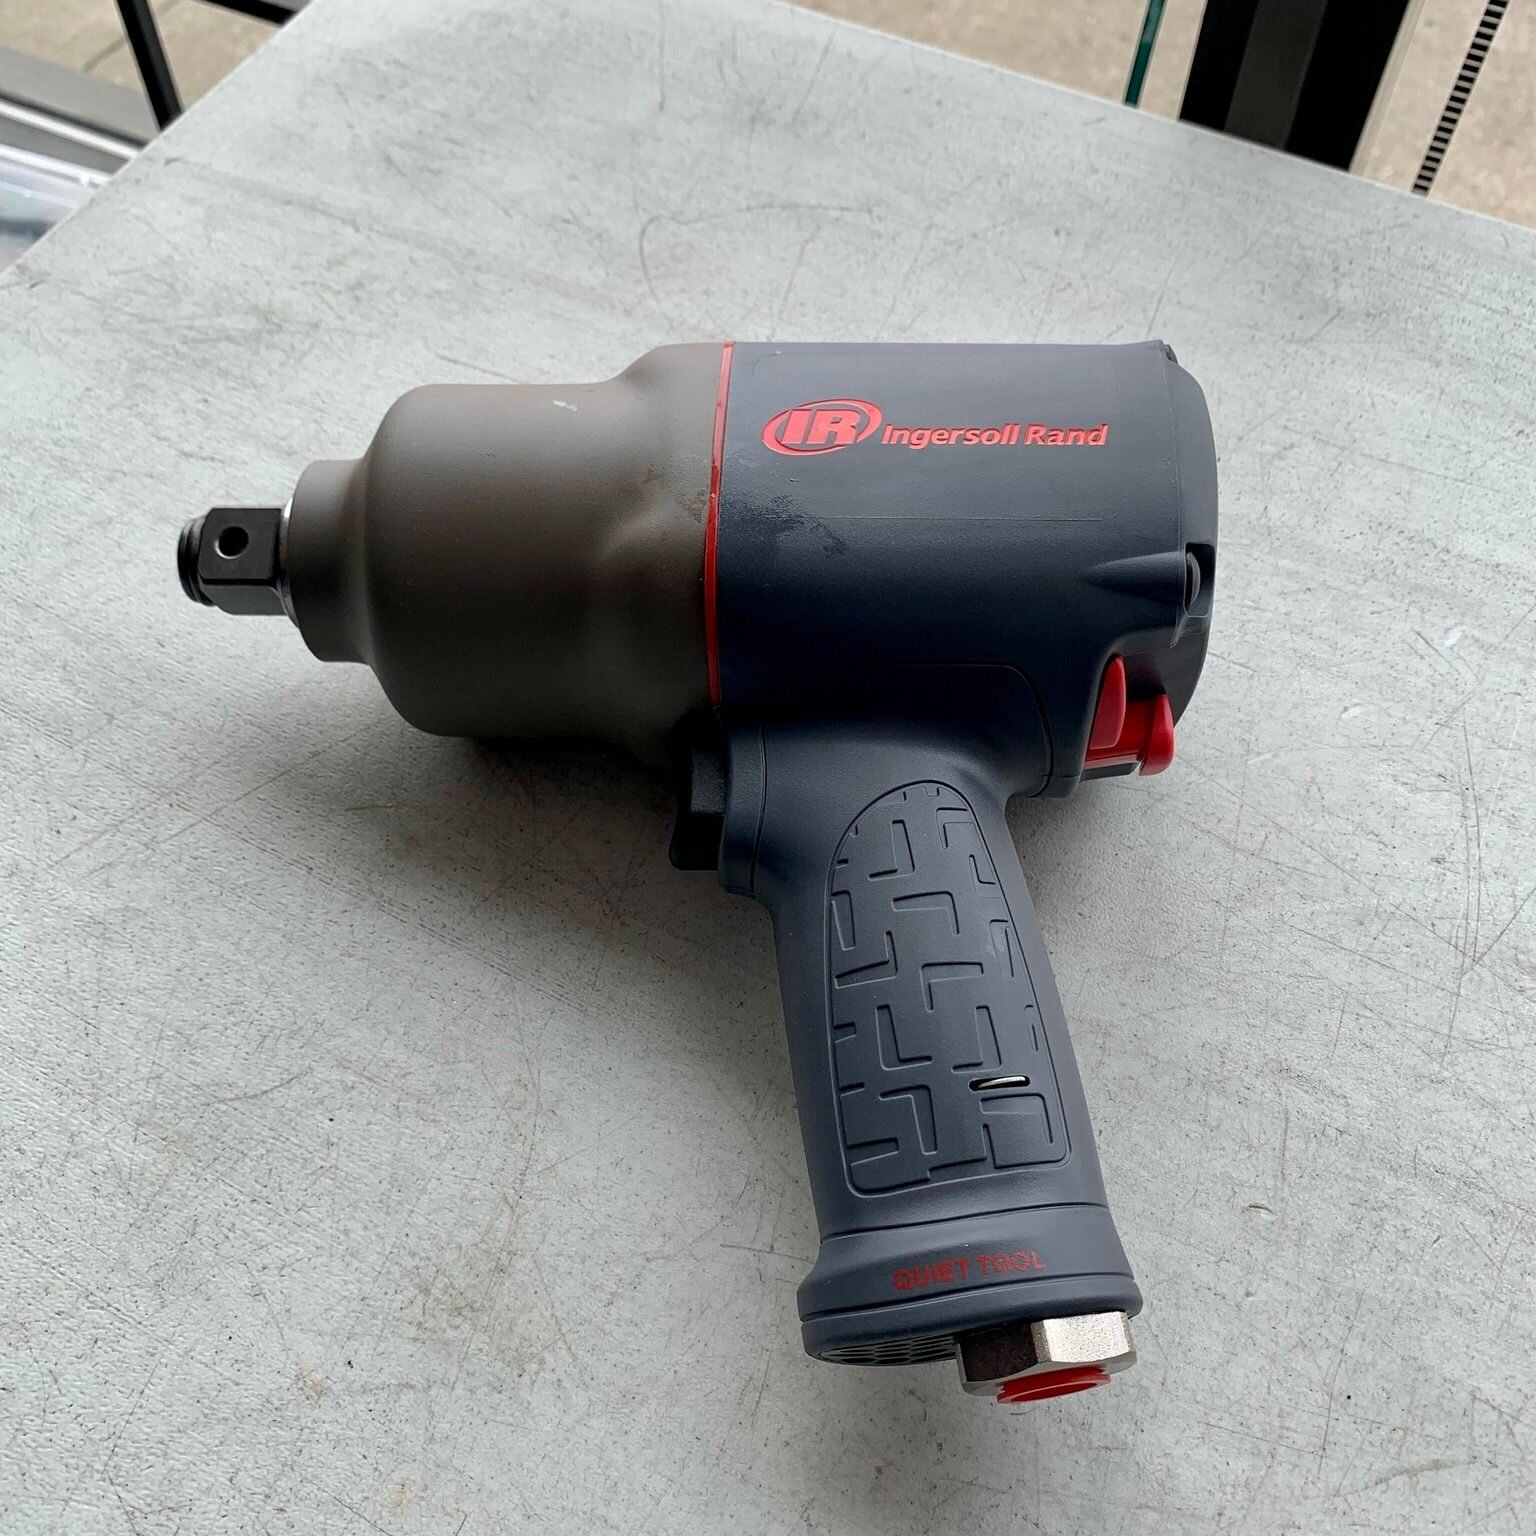 Questions about which impact gun is the right fit for the job? Our team of professionals are always ready to help you make the right choice. Need more help? Check out our latest blog post &ndash; The Ultimate Guide to Choosing the Best Air Tool Brand